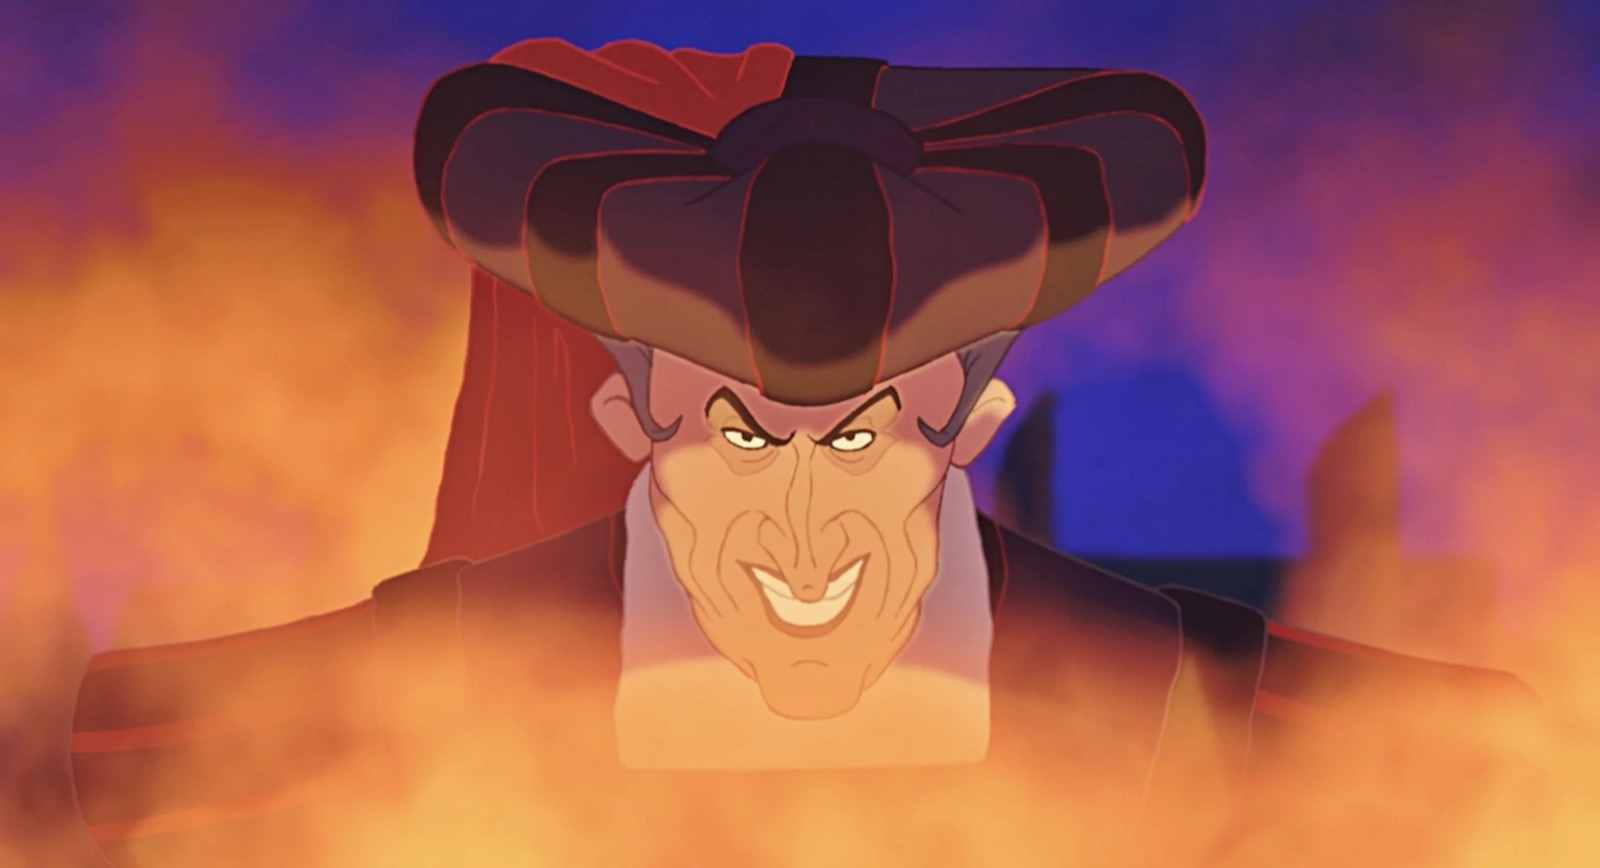 You got: Frollo (The Hunchback of Notre Dame)! Which Disney Villain Are You? Find Your Evil Twin in This Quiz!